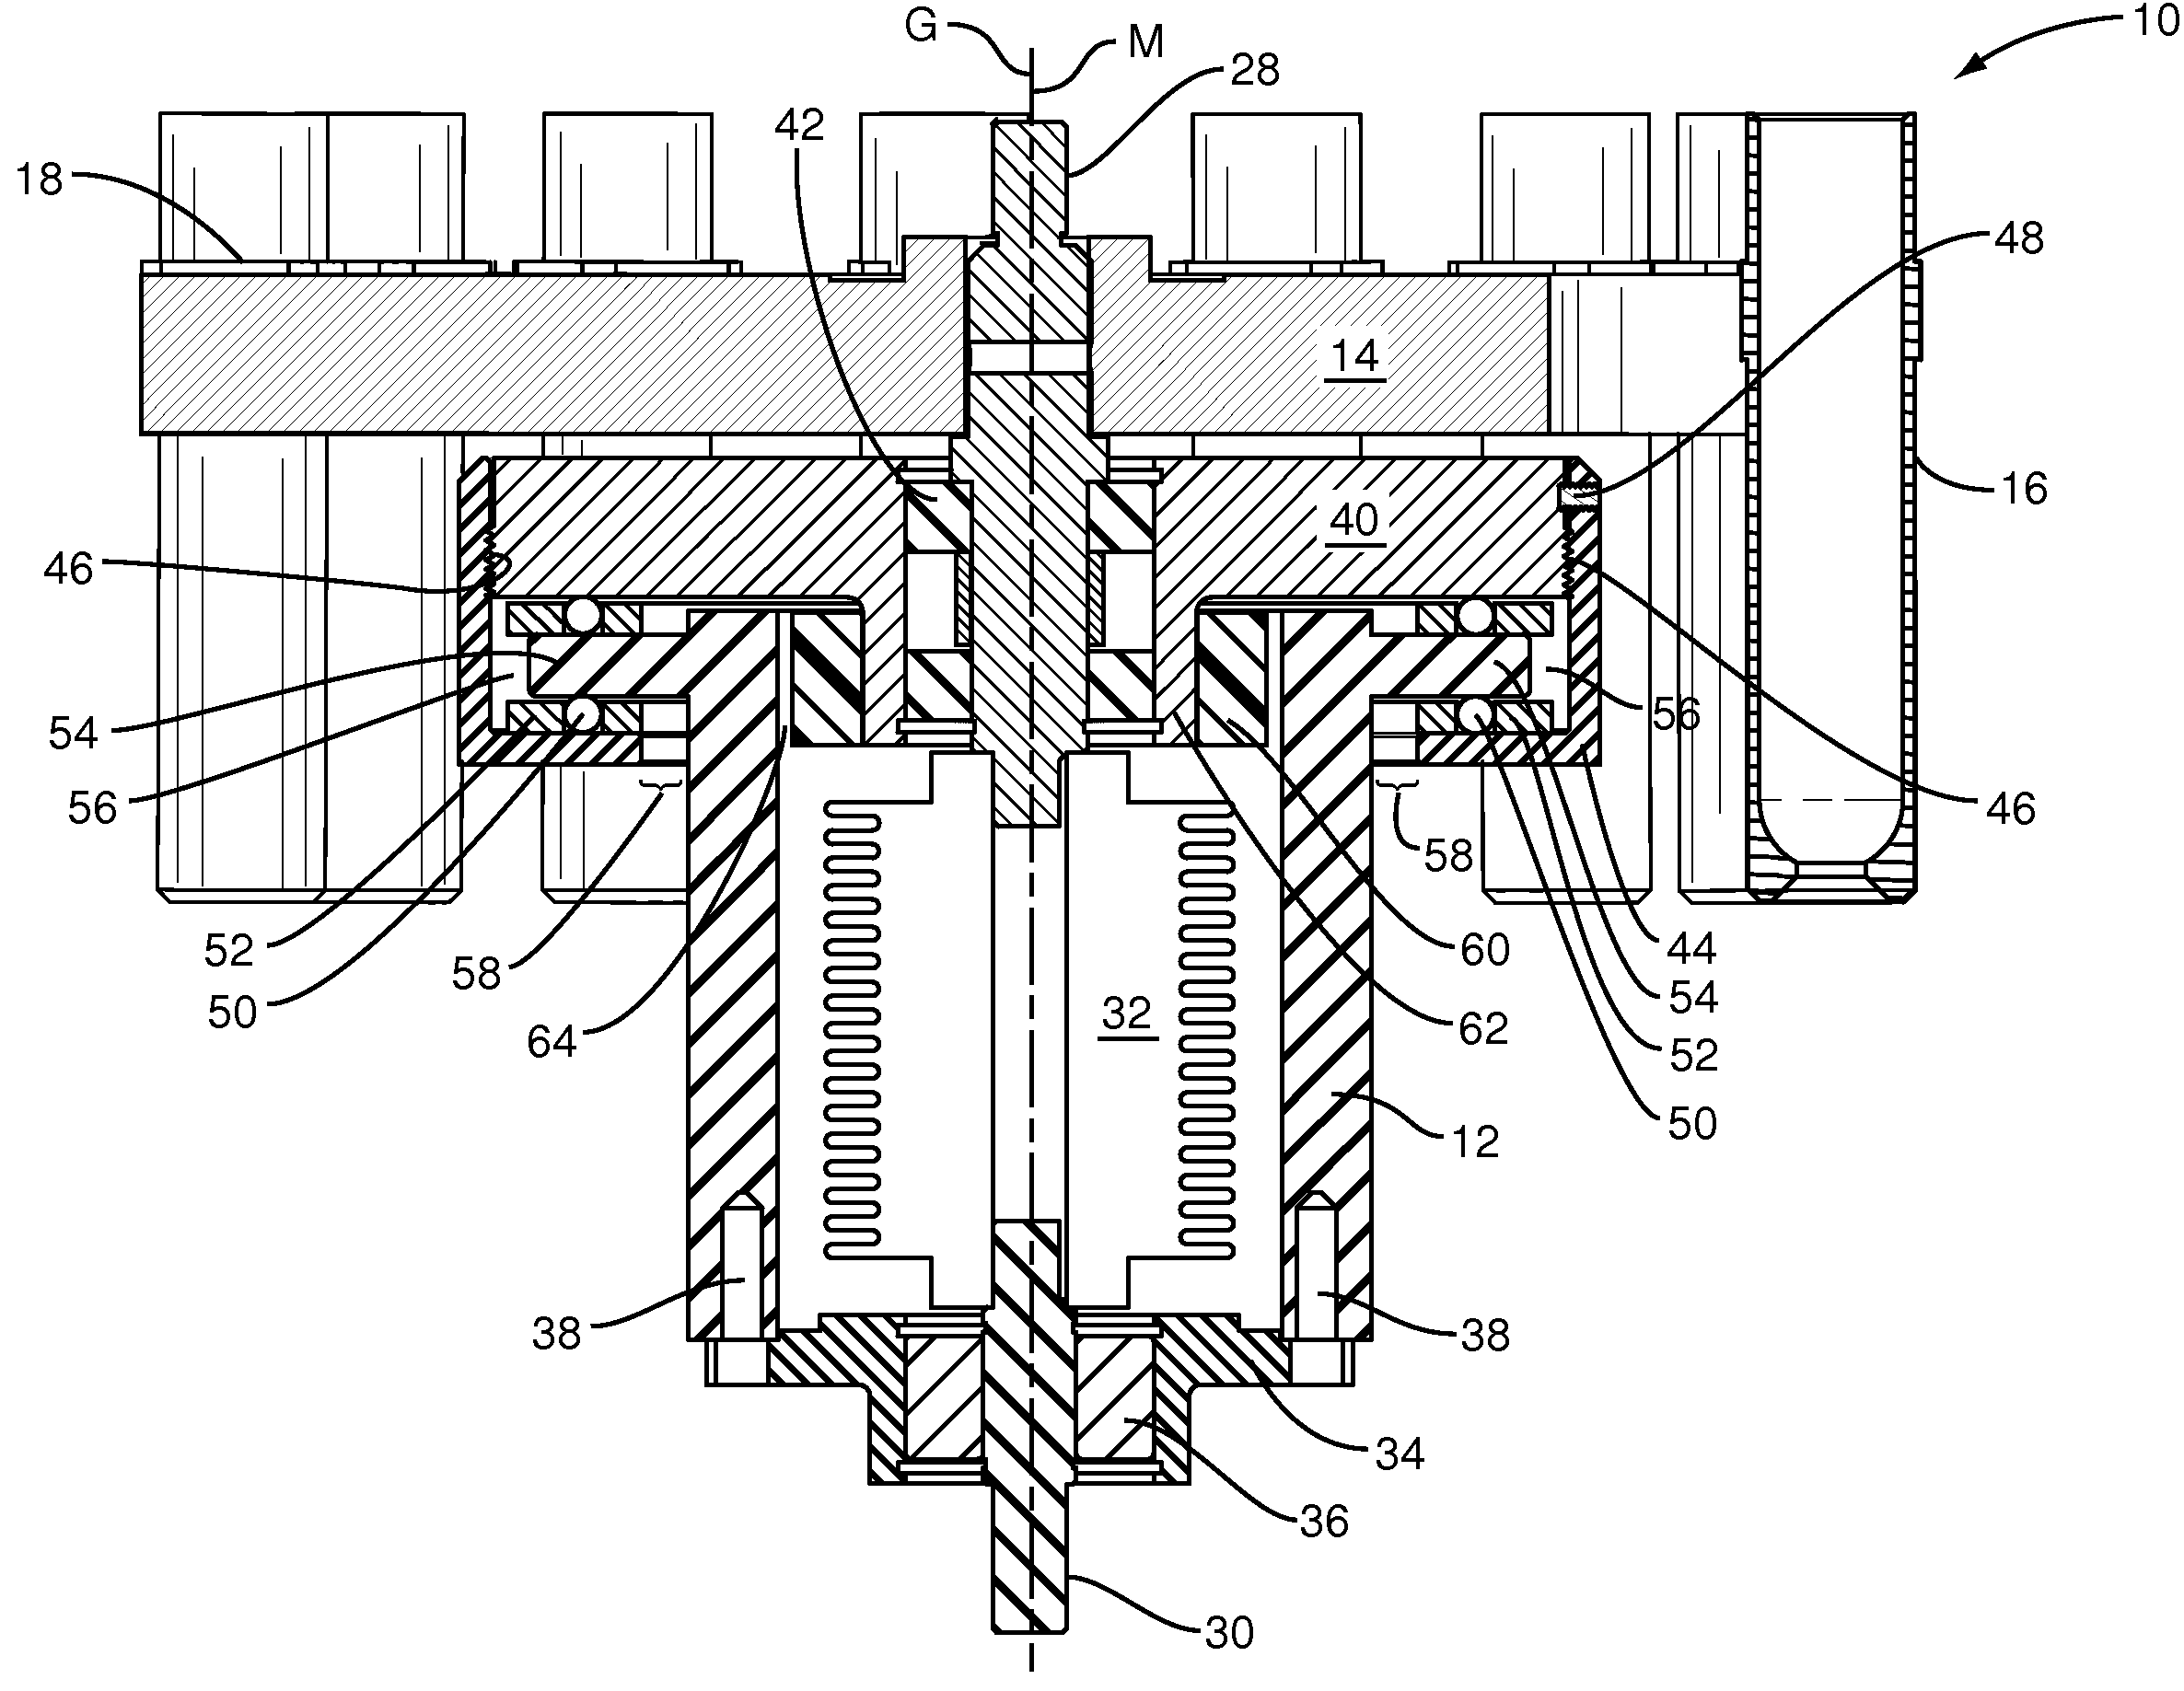 Automatic balancing device and system for centrifuge rotors